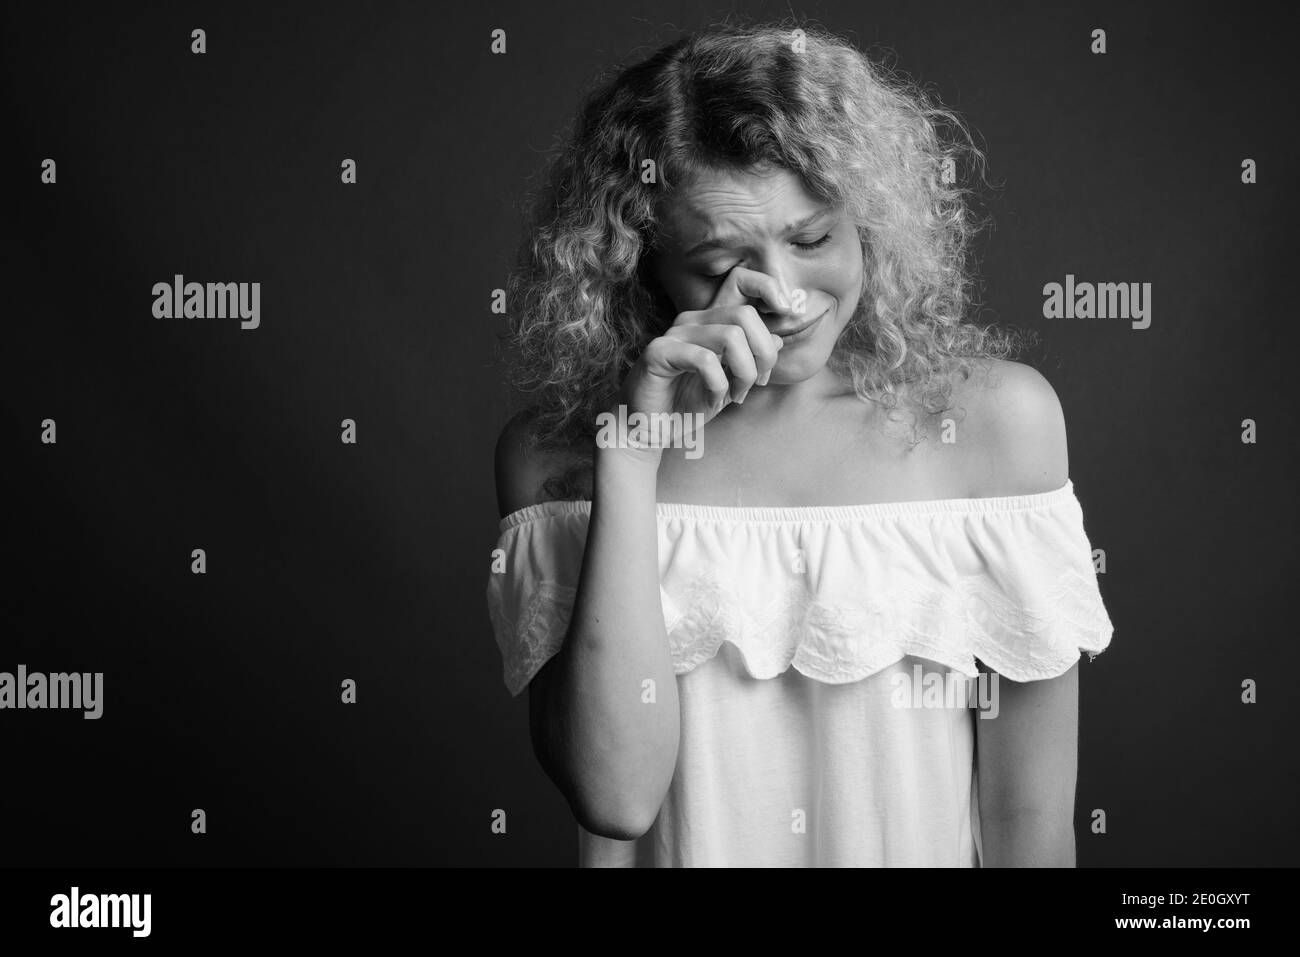 Young beautiful woman with blond curly hair against gray background Stock Photo